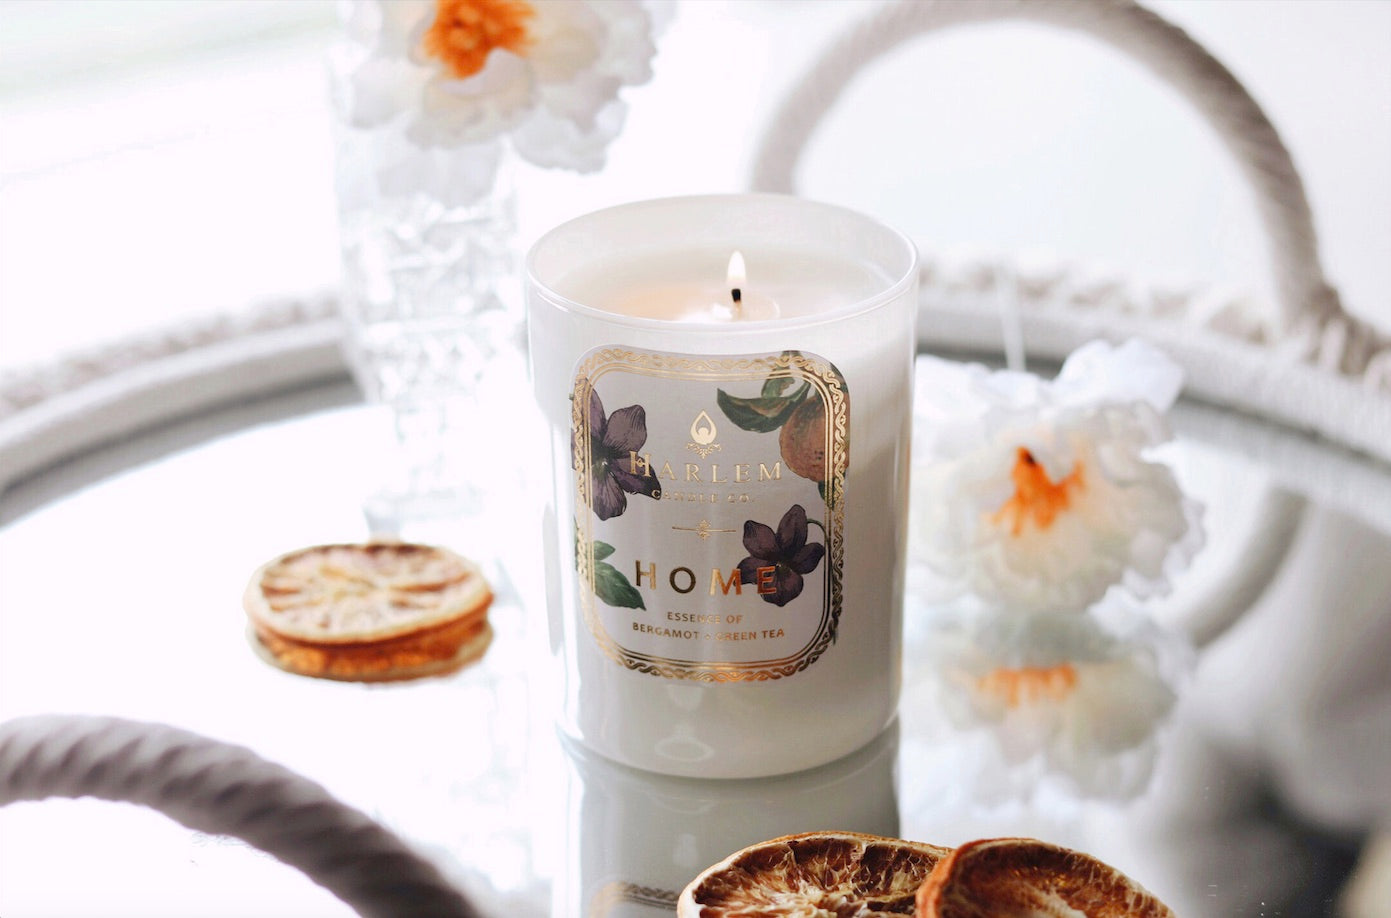 Photo of our Home candle from the botanical collection in a lifestyle setting